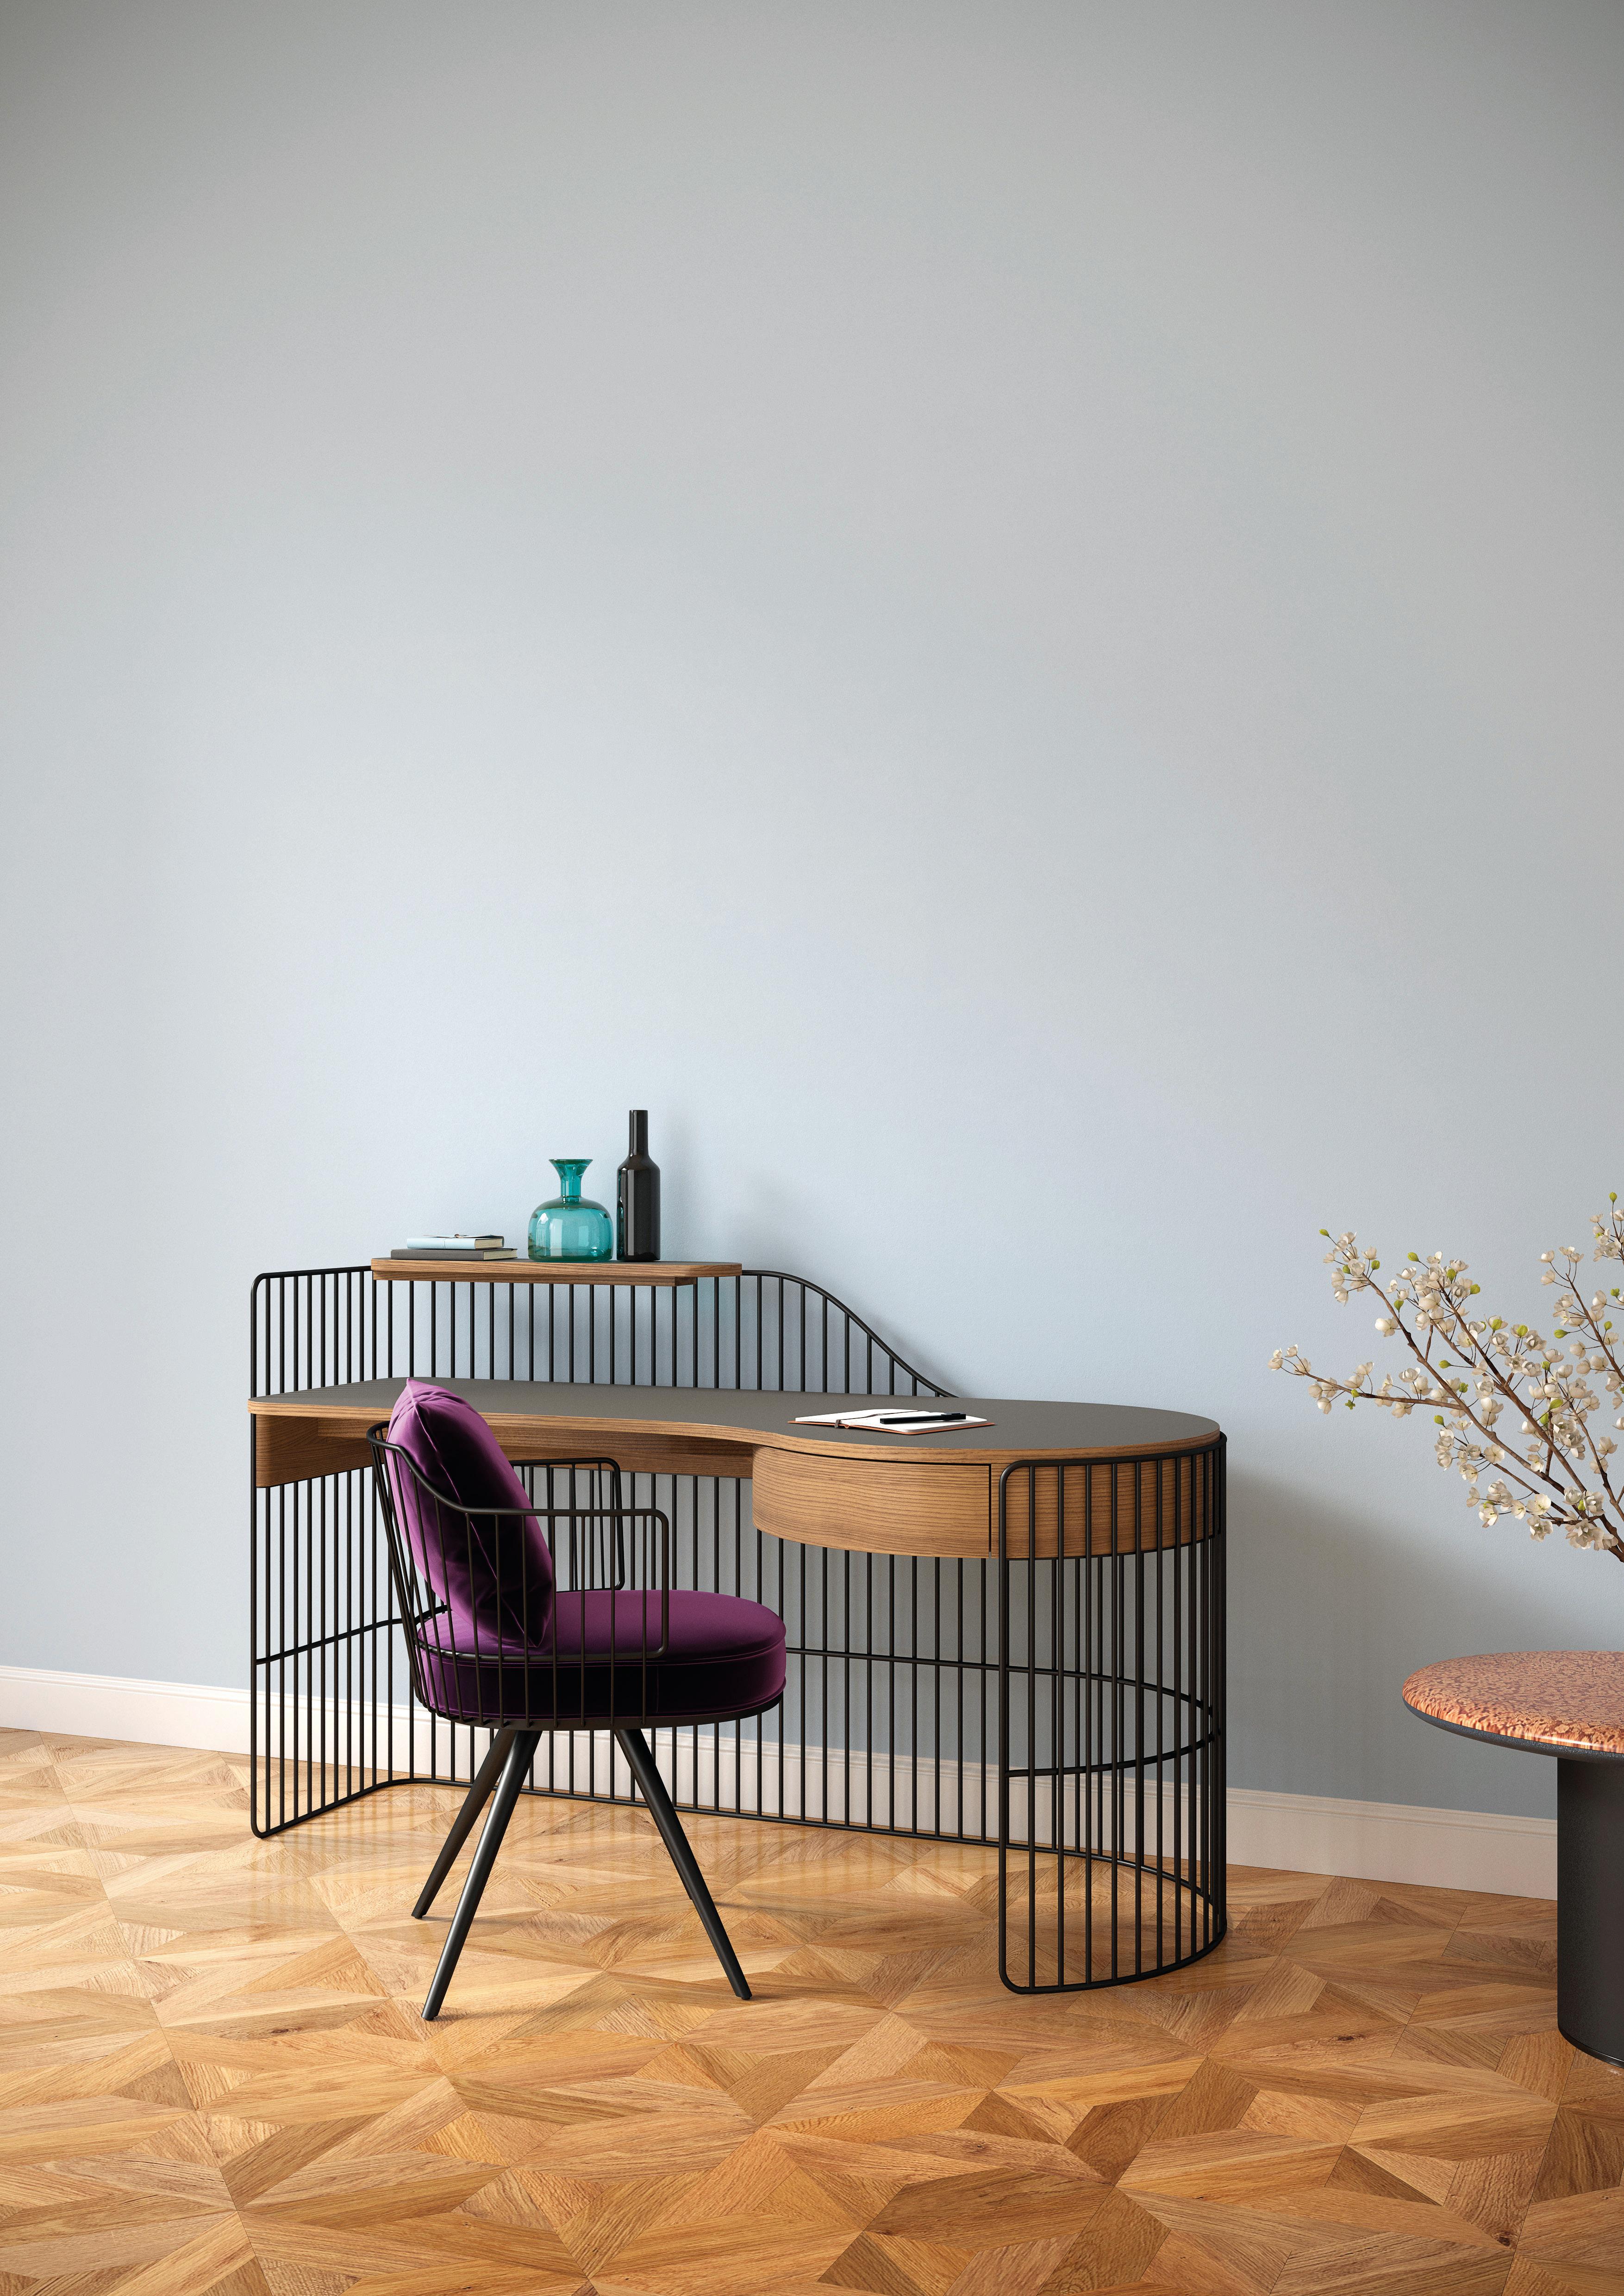 The asymmetrical desk of the PARADISE BIRD collection by Luca Nichetto invites for interaction with its sinuous curves and elegant lines. The iconic workplace with fronts in black stained ash or natural walnut, a refined matte coated black surface,